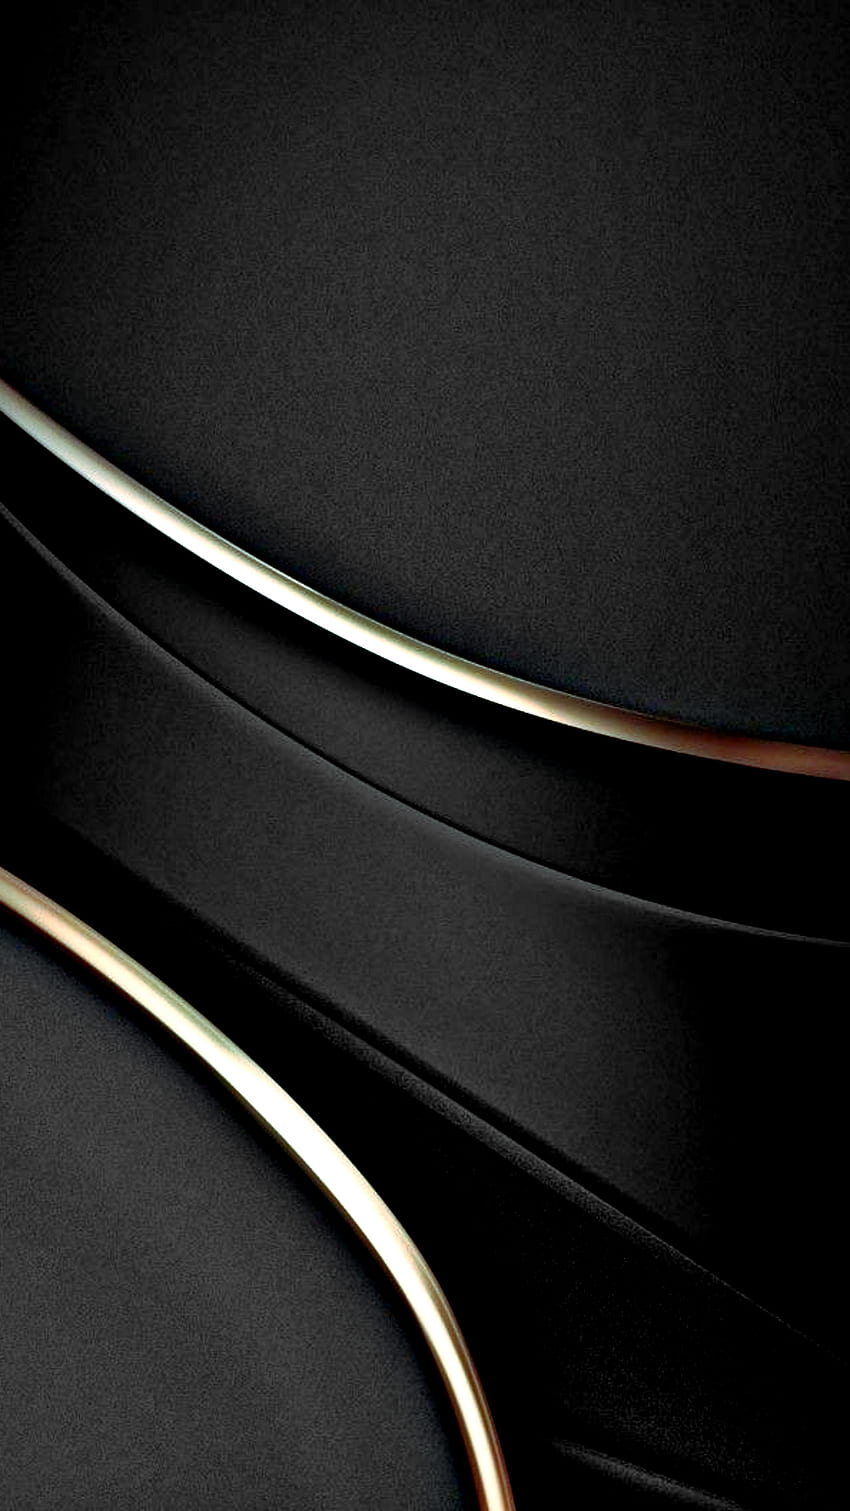 kjkhlkj, shadow, android, pattern, tint, gold, 3d, samsung, modern, flat, Design, layers, overlayed, waves, new, texture, black, iphone, plus, curves, material, mate, , silver, lg wallpaper ponsel HD